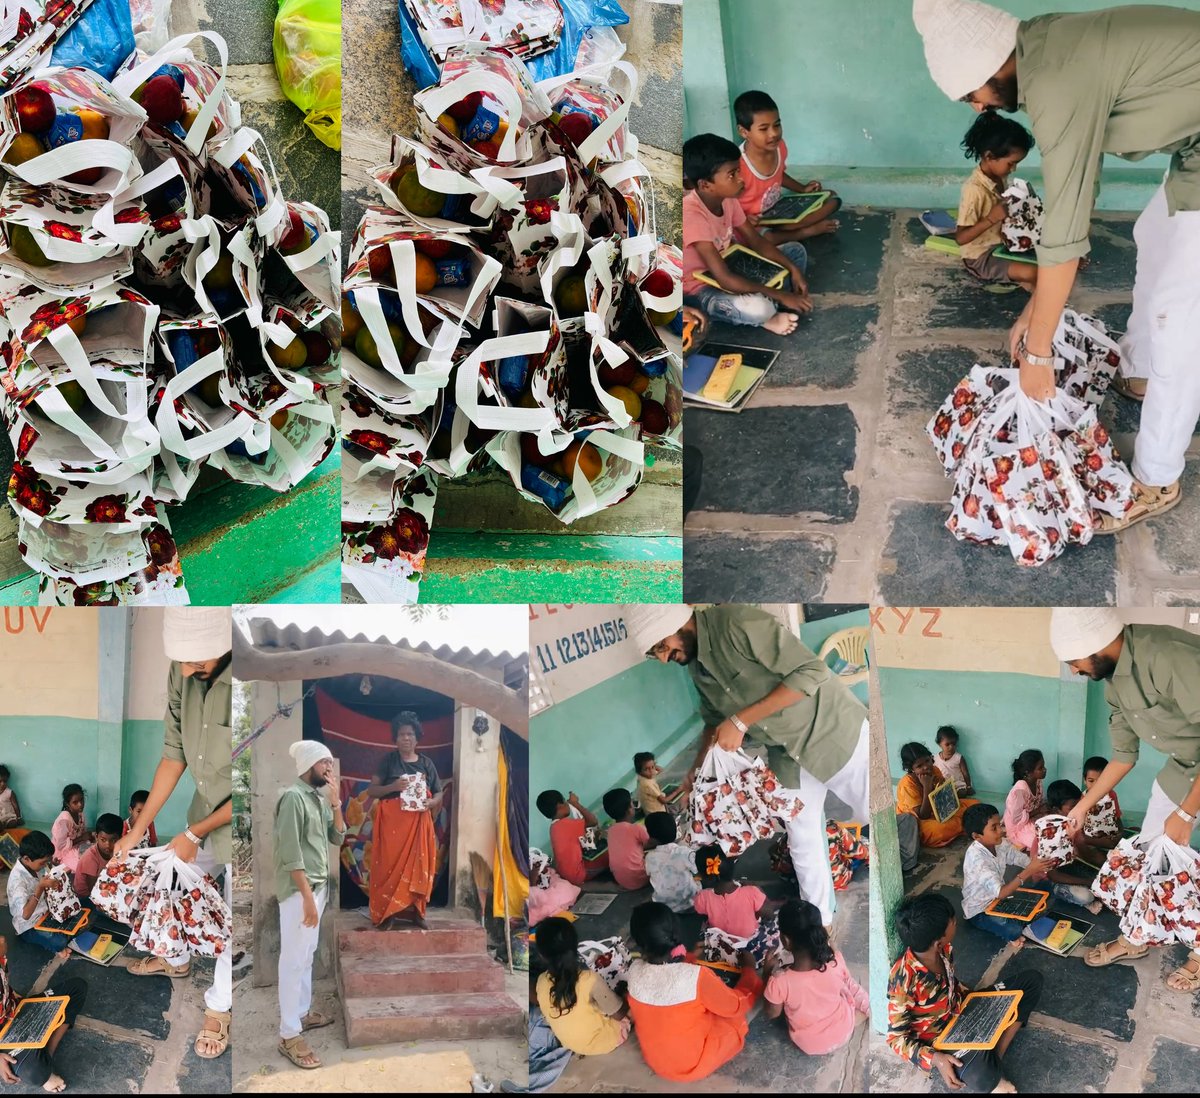 Visited an underprivileged area and distributed as many fruit covers as I could on your name
@NameisNani

Wishing My Natural Star A Happy Birthday & Saturday Once Again 🤗

#HappyBirthdayNani